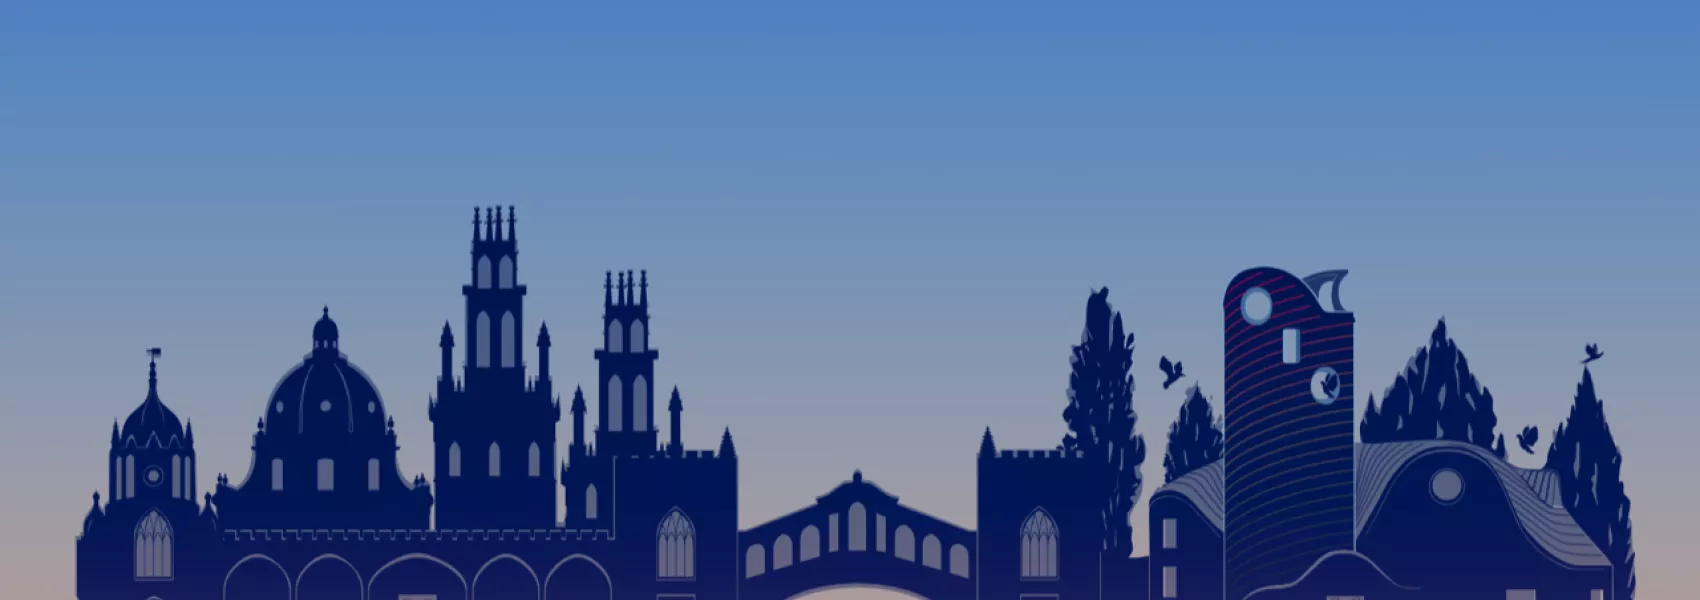 Representation of the Oxford skyline with Gradel tower